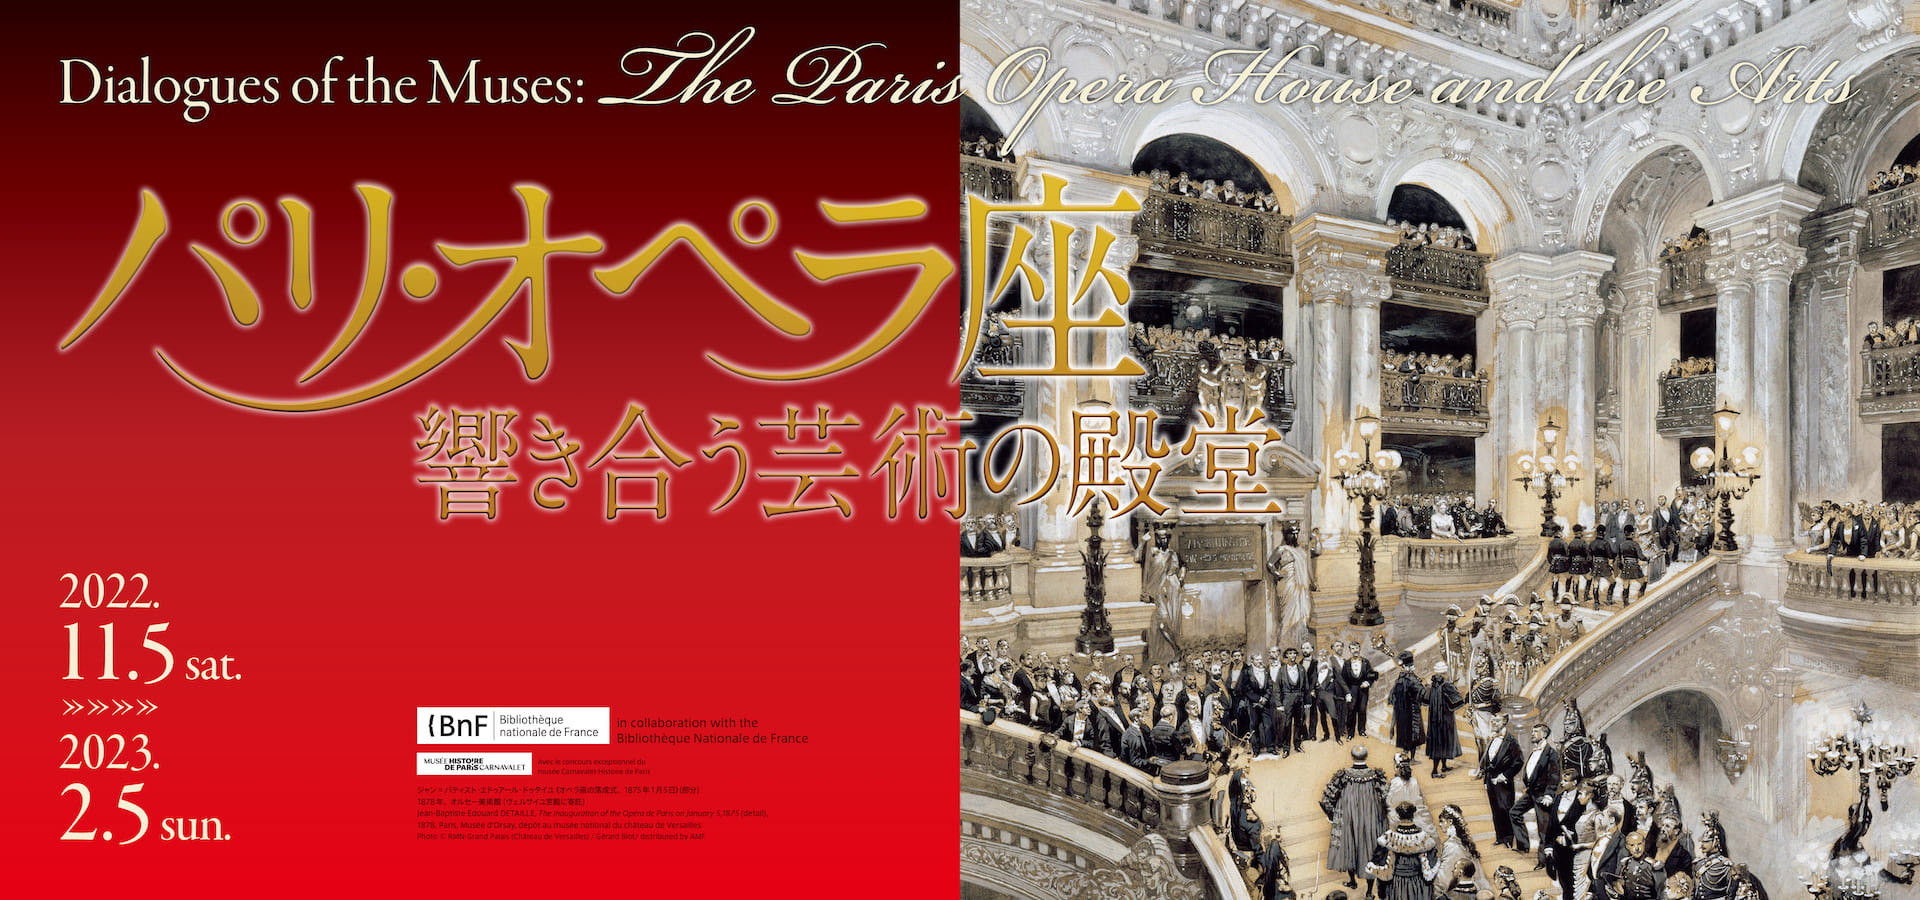 Dialogues of the Muses: The Paris Opera House and the Arts